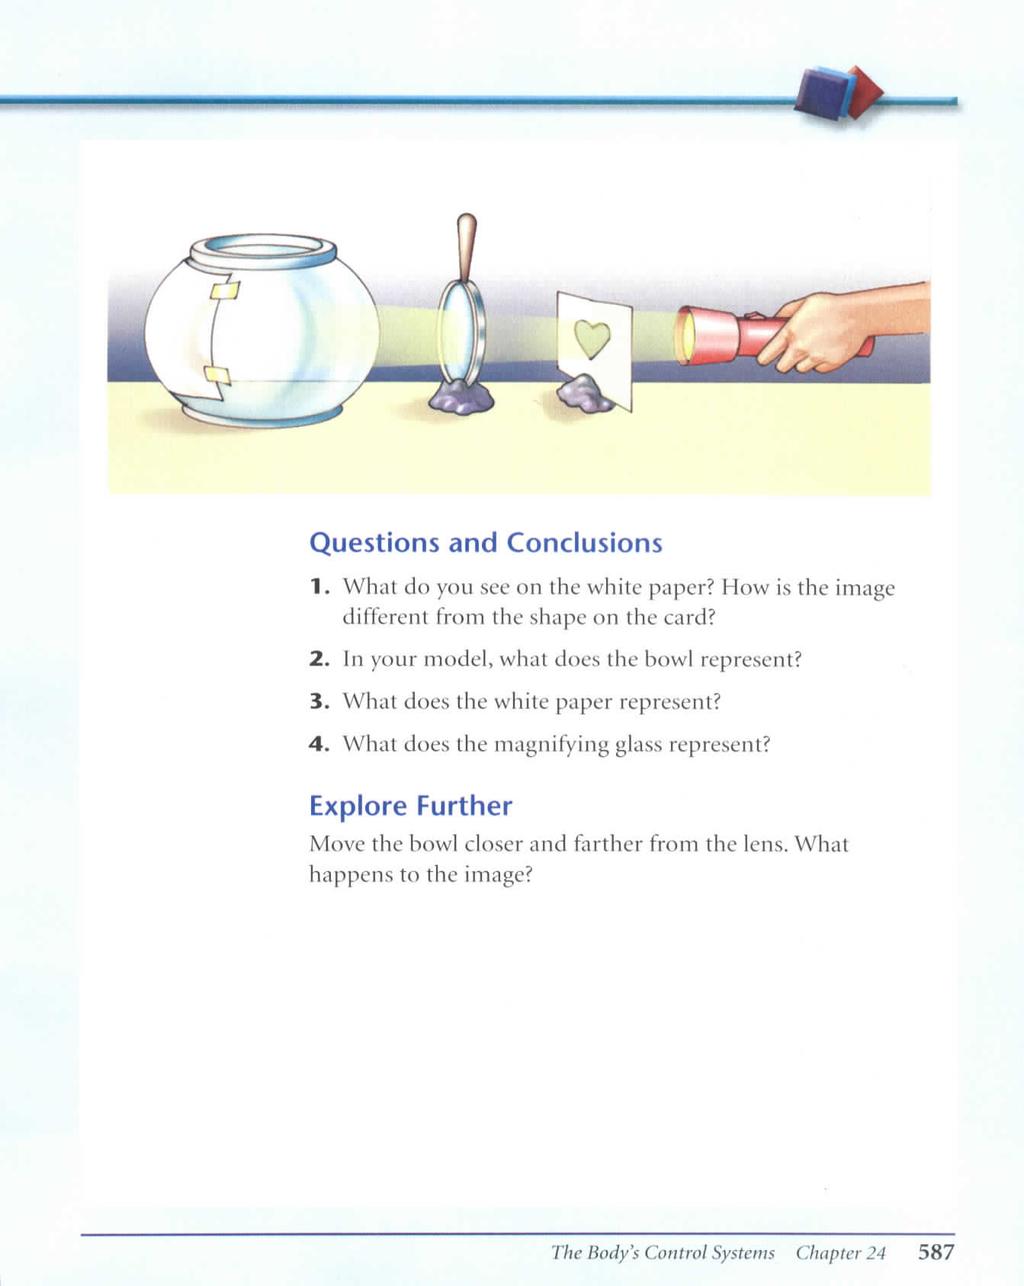 Questions and Conclusions 1. What do you see on the white paper? How is the image different from the shape on the card? 2. In your model, what does the bowl represent? 3.